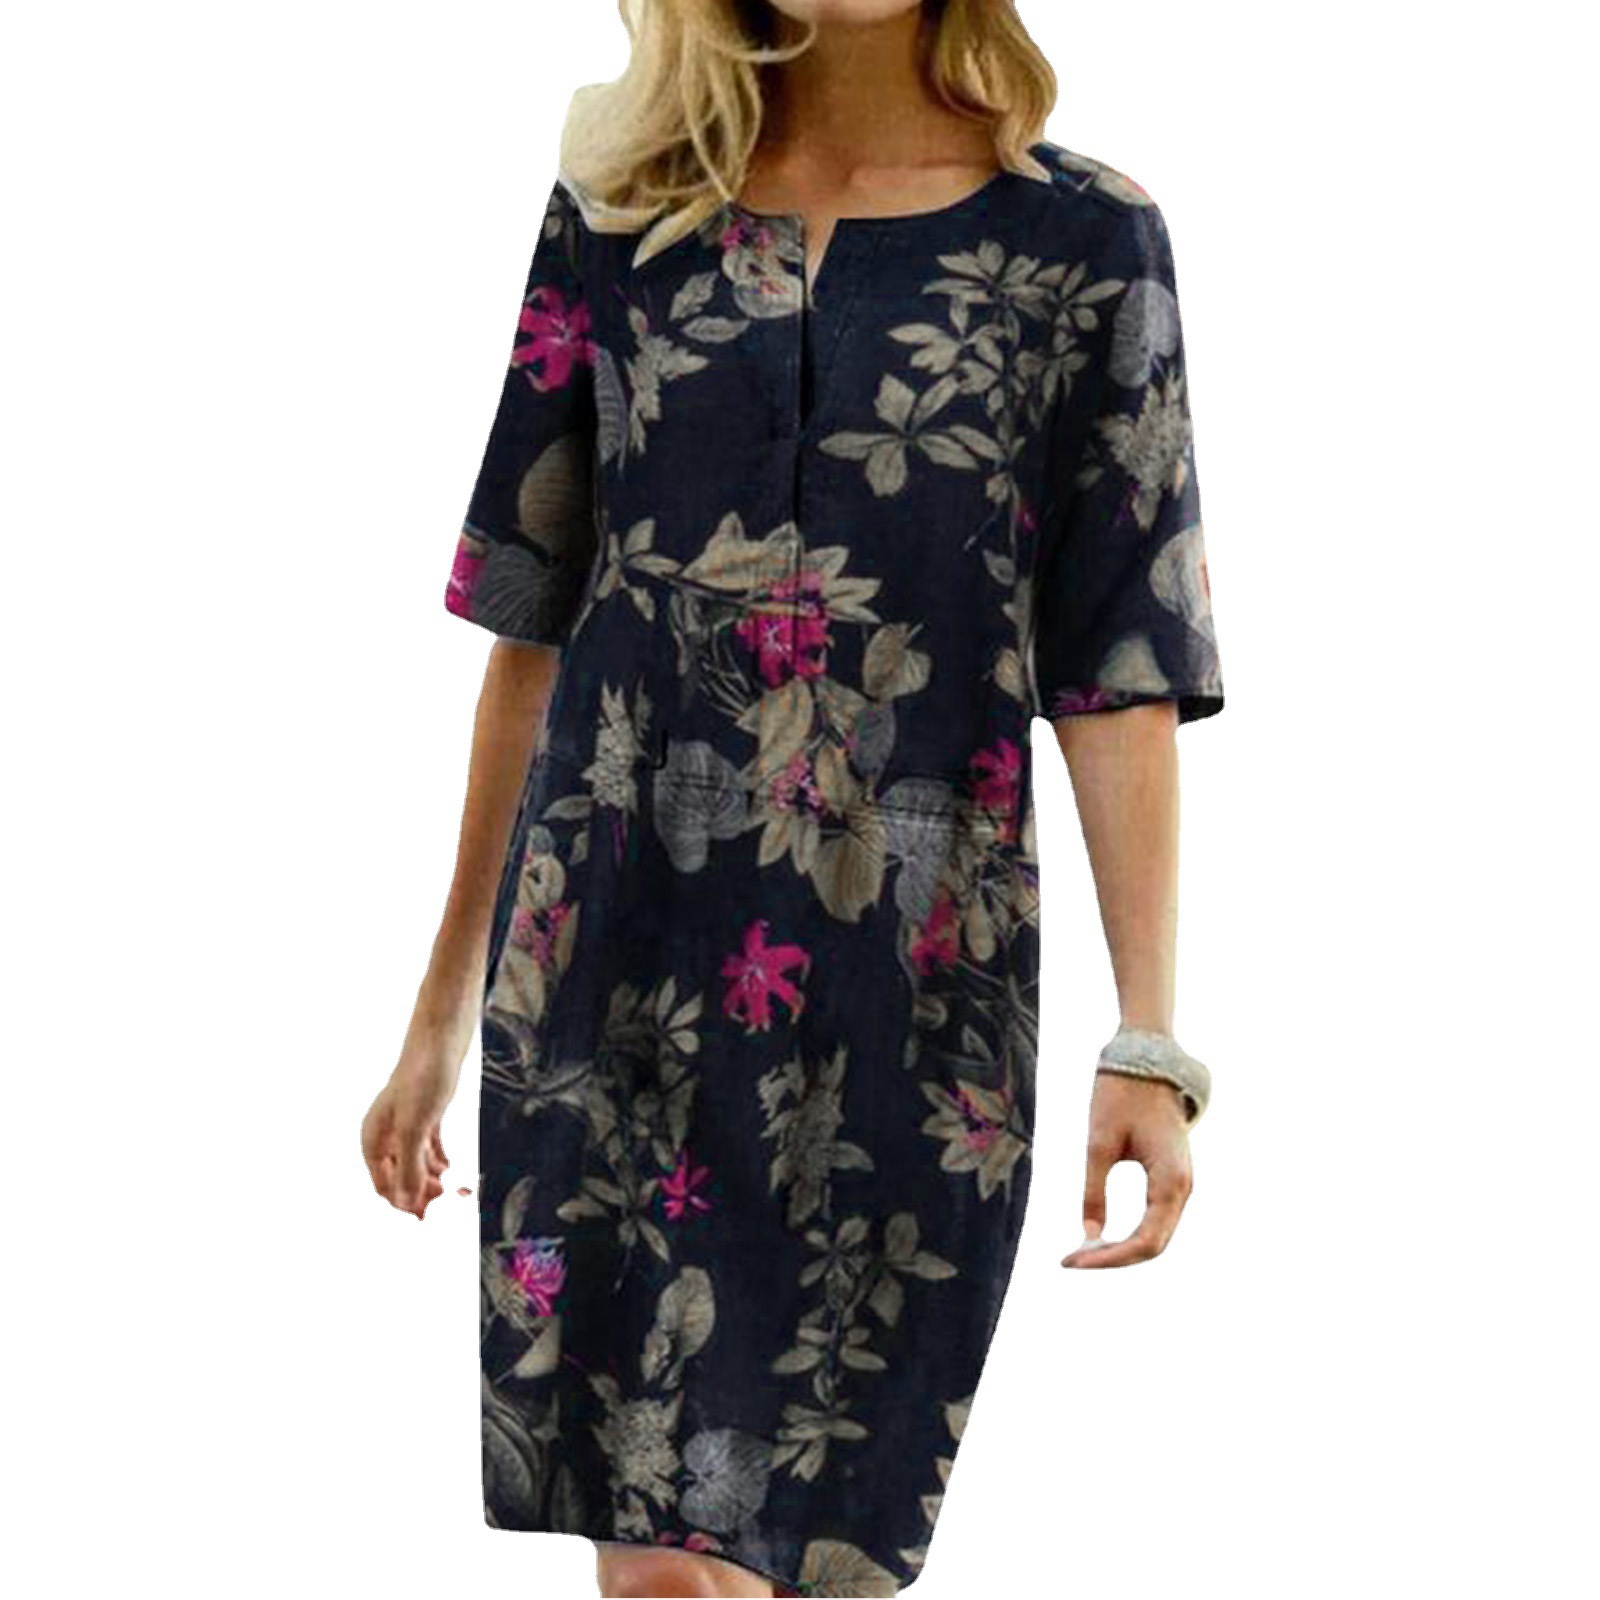 2023 Europe and America Cross Border New Women's Wish AliExpress Floral Floral Print Slit round Neck Half Sleeve Vintage Dress